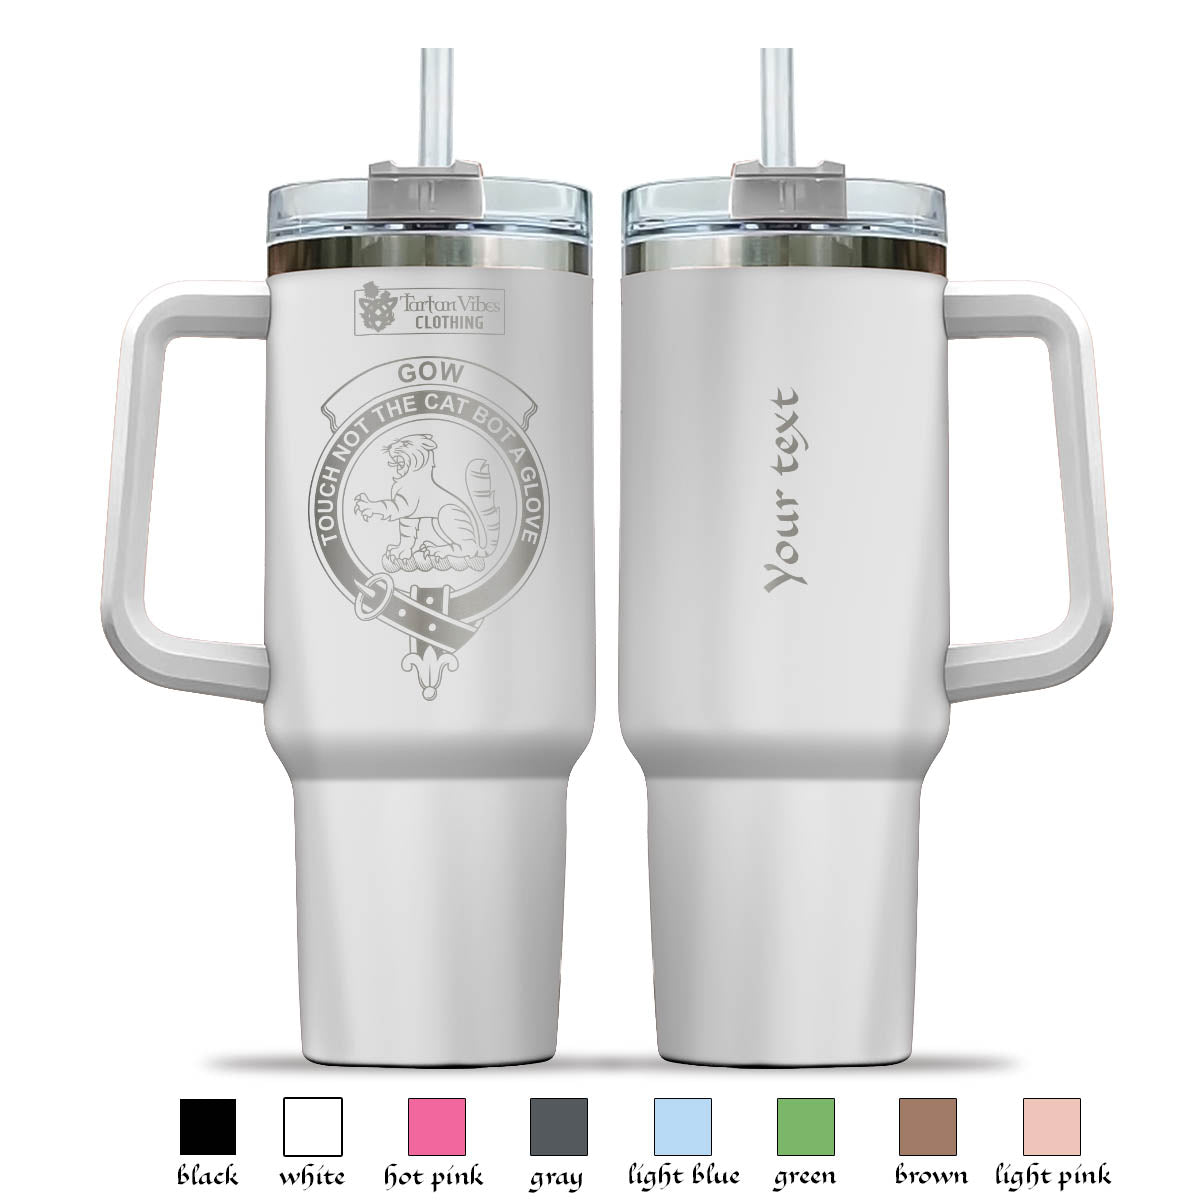 Tartan Vibes Clothing Gow Engraved Family Crest Tumbler with Handle